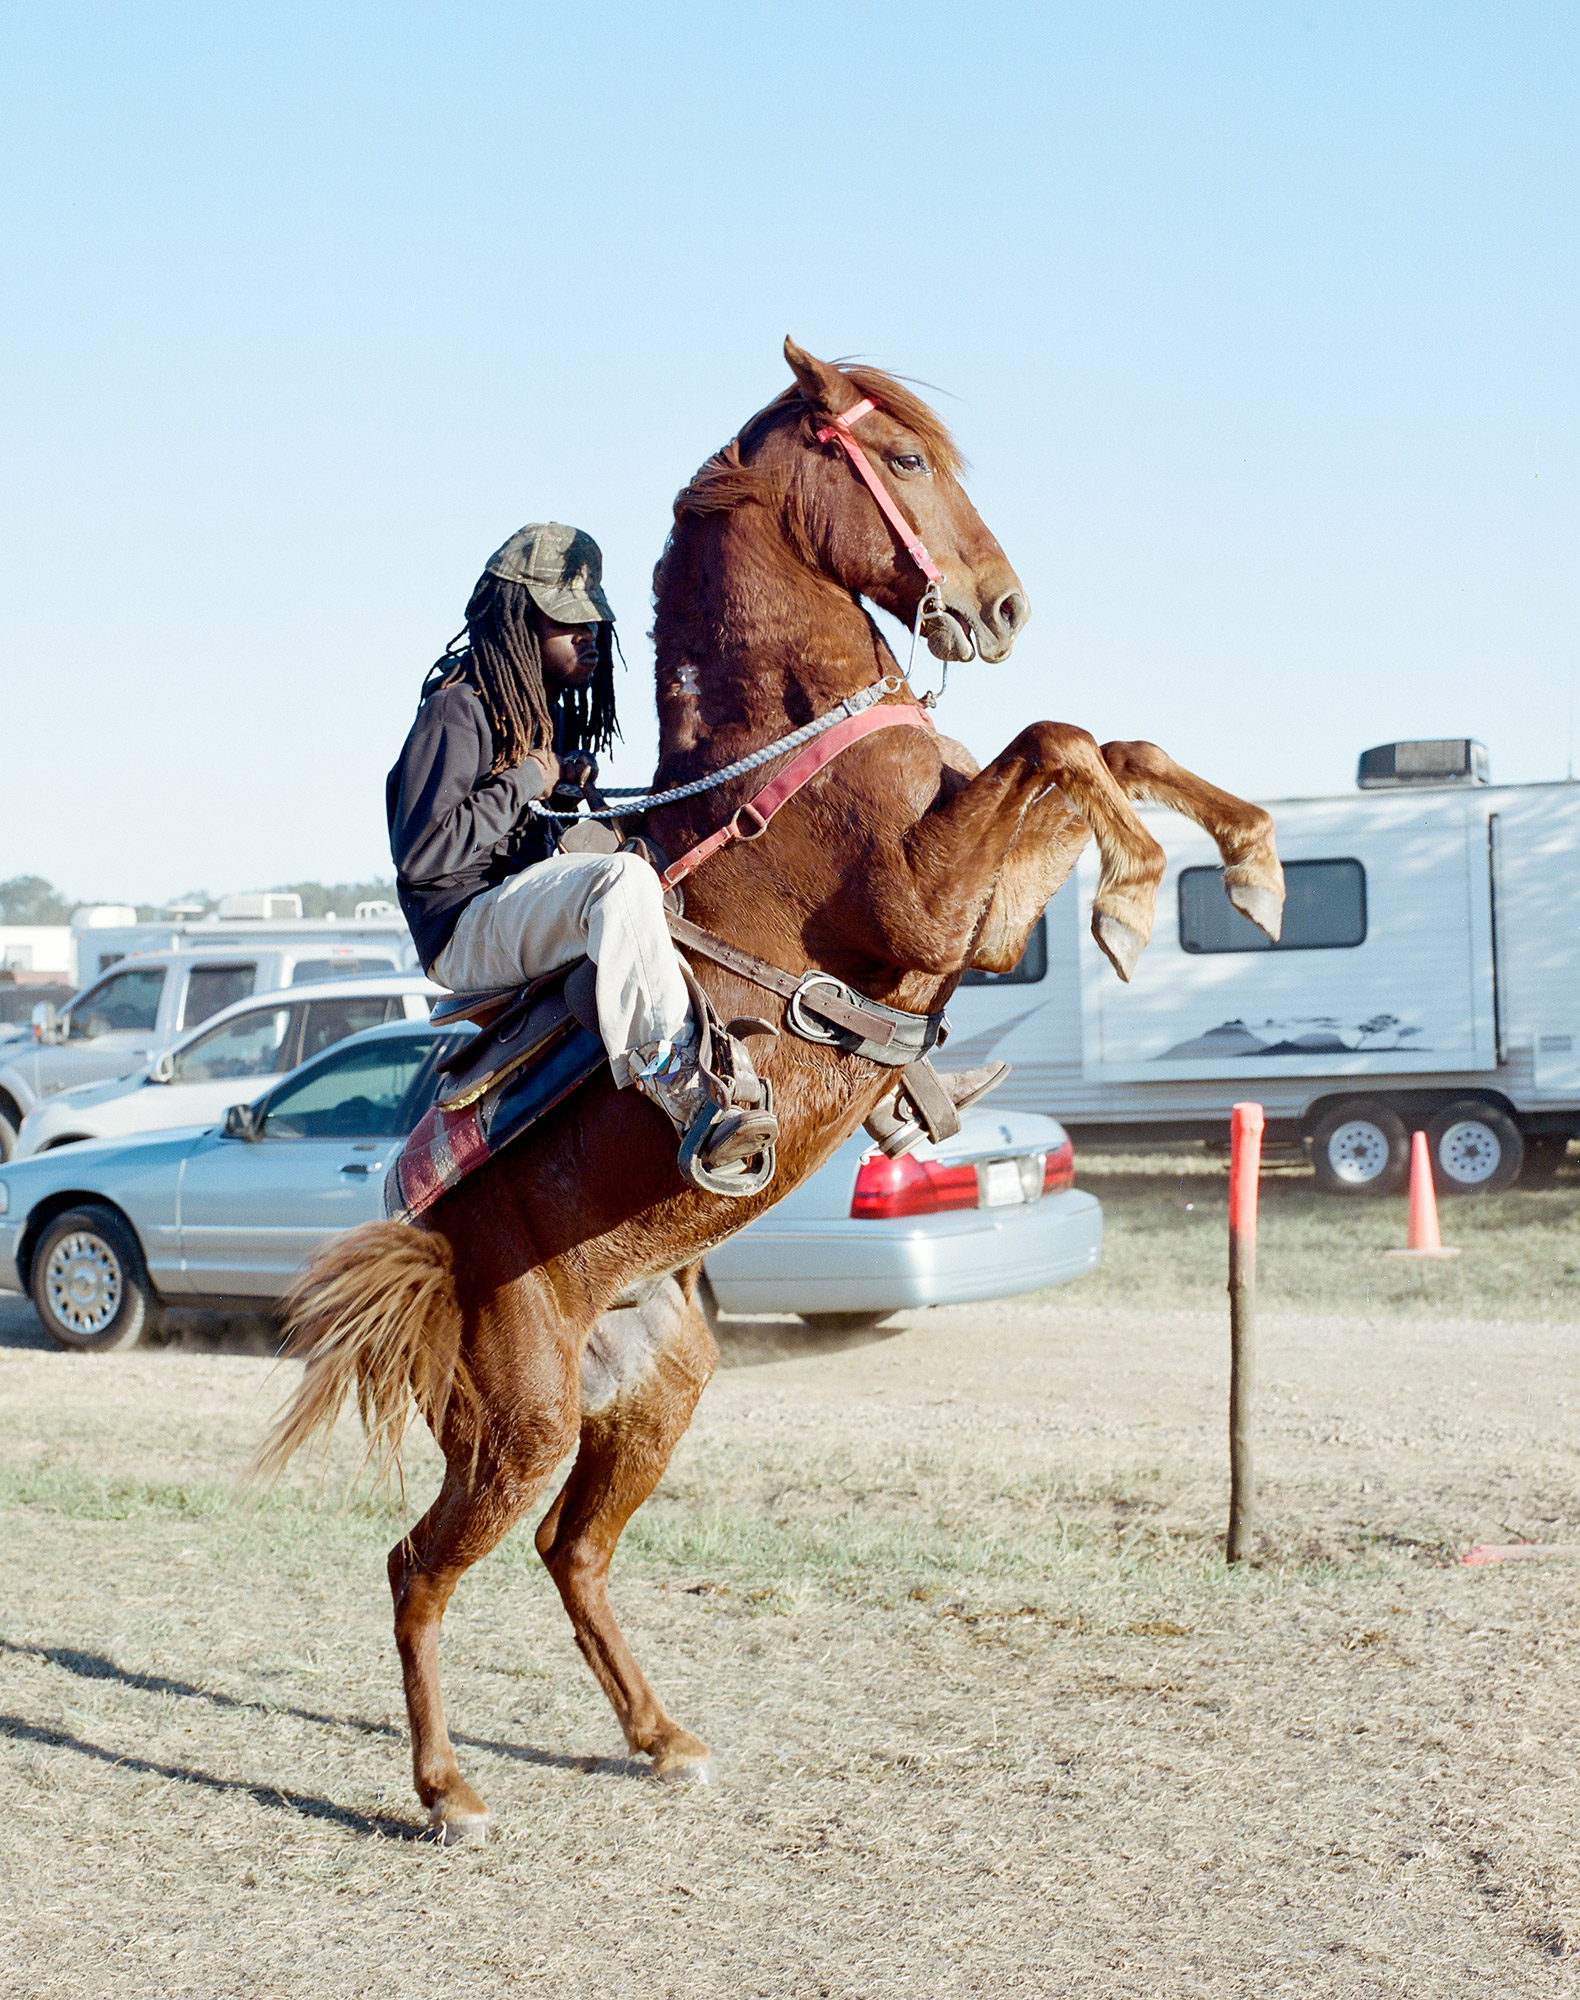 A man doing a trick at a trail ride in Southern Louisiana, 2014.